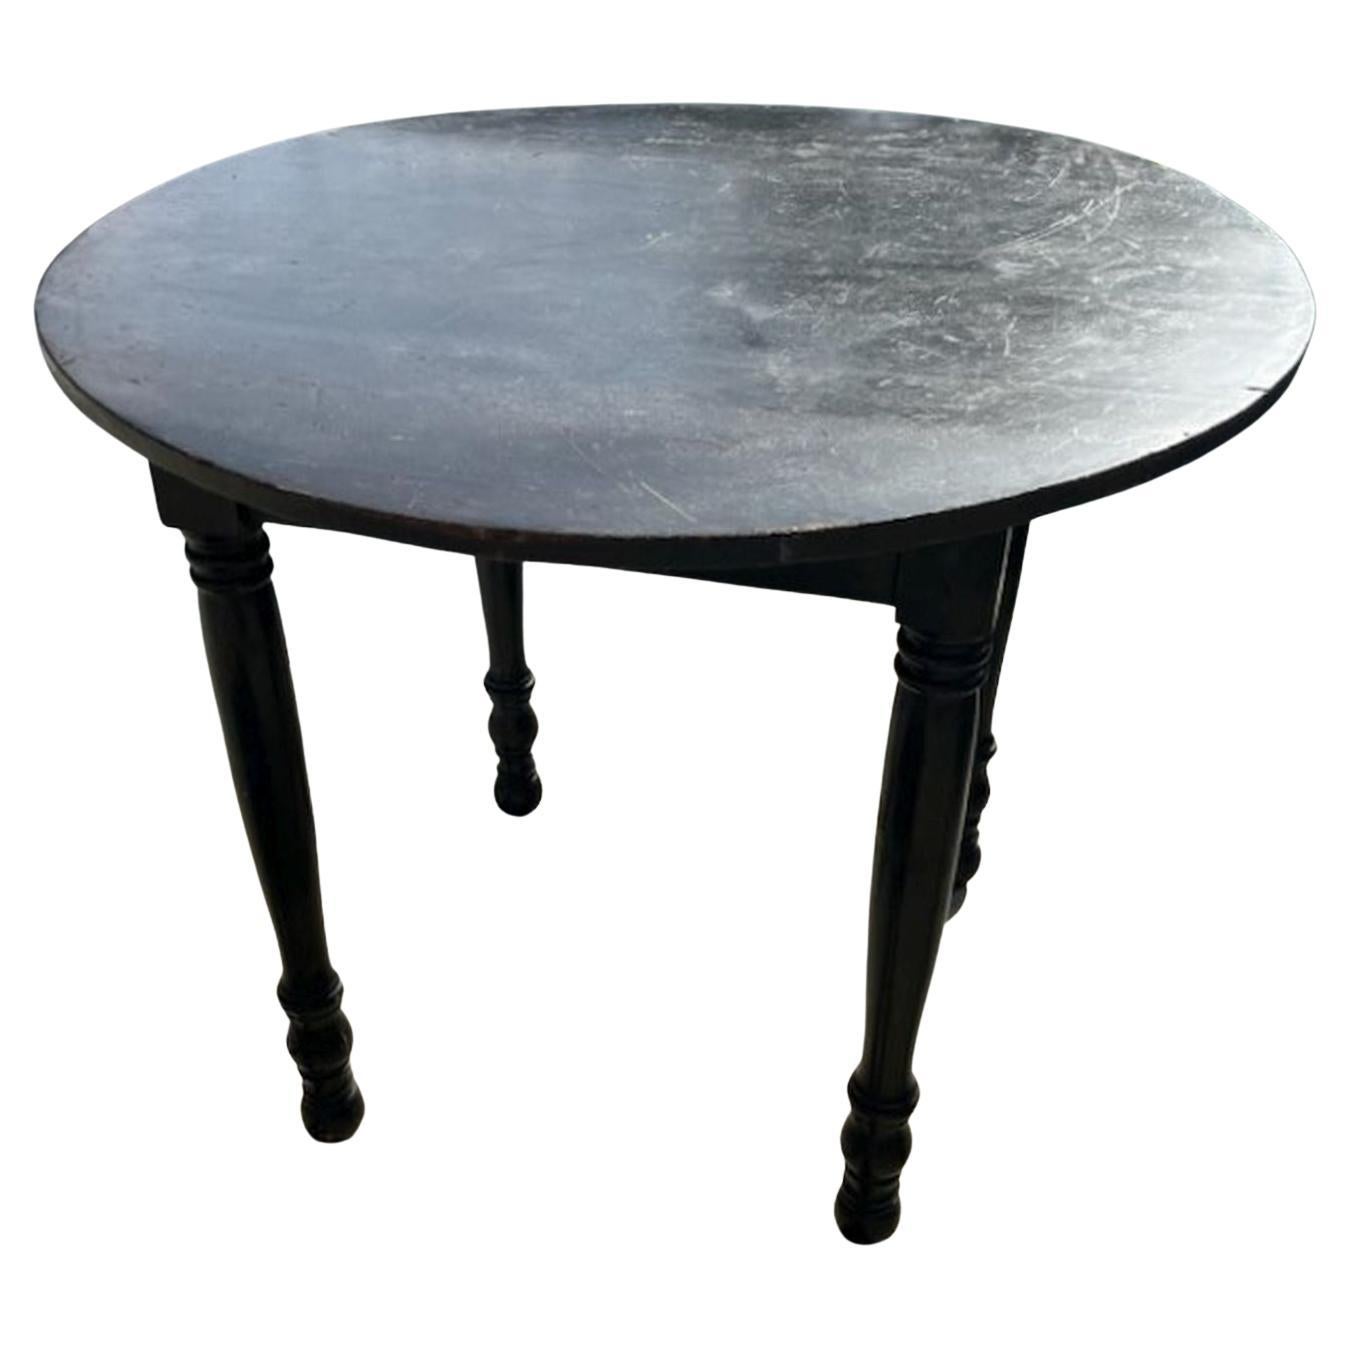 19thc Black Painted Round Tavern Table For Sale